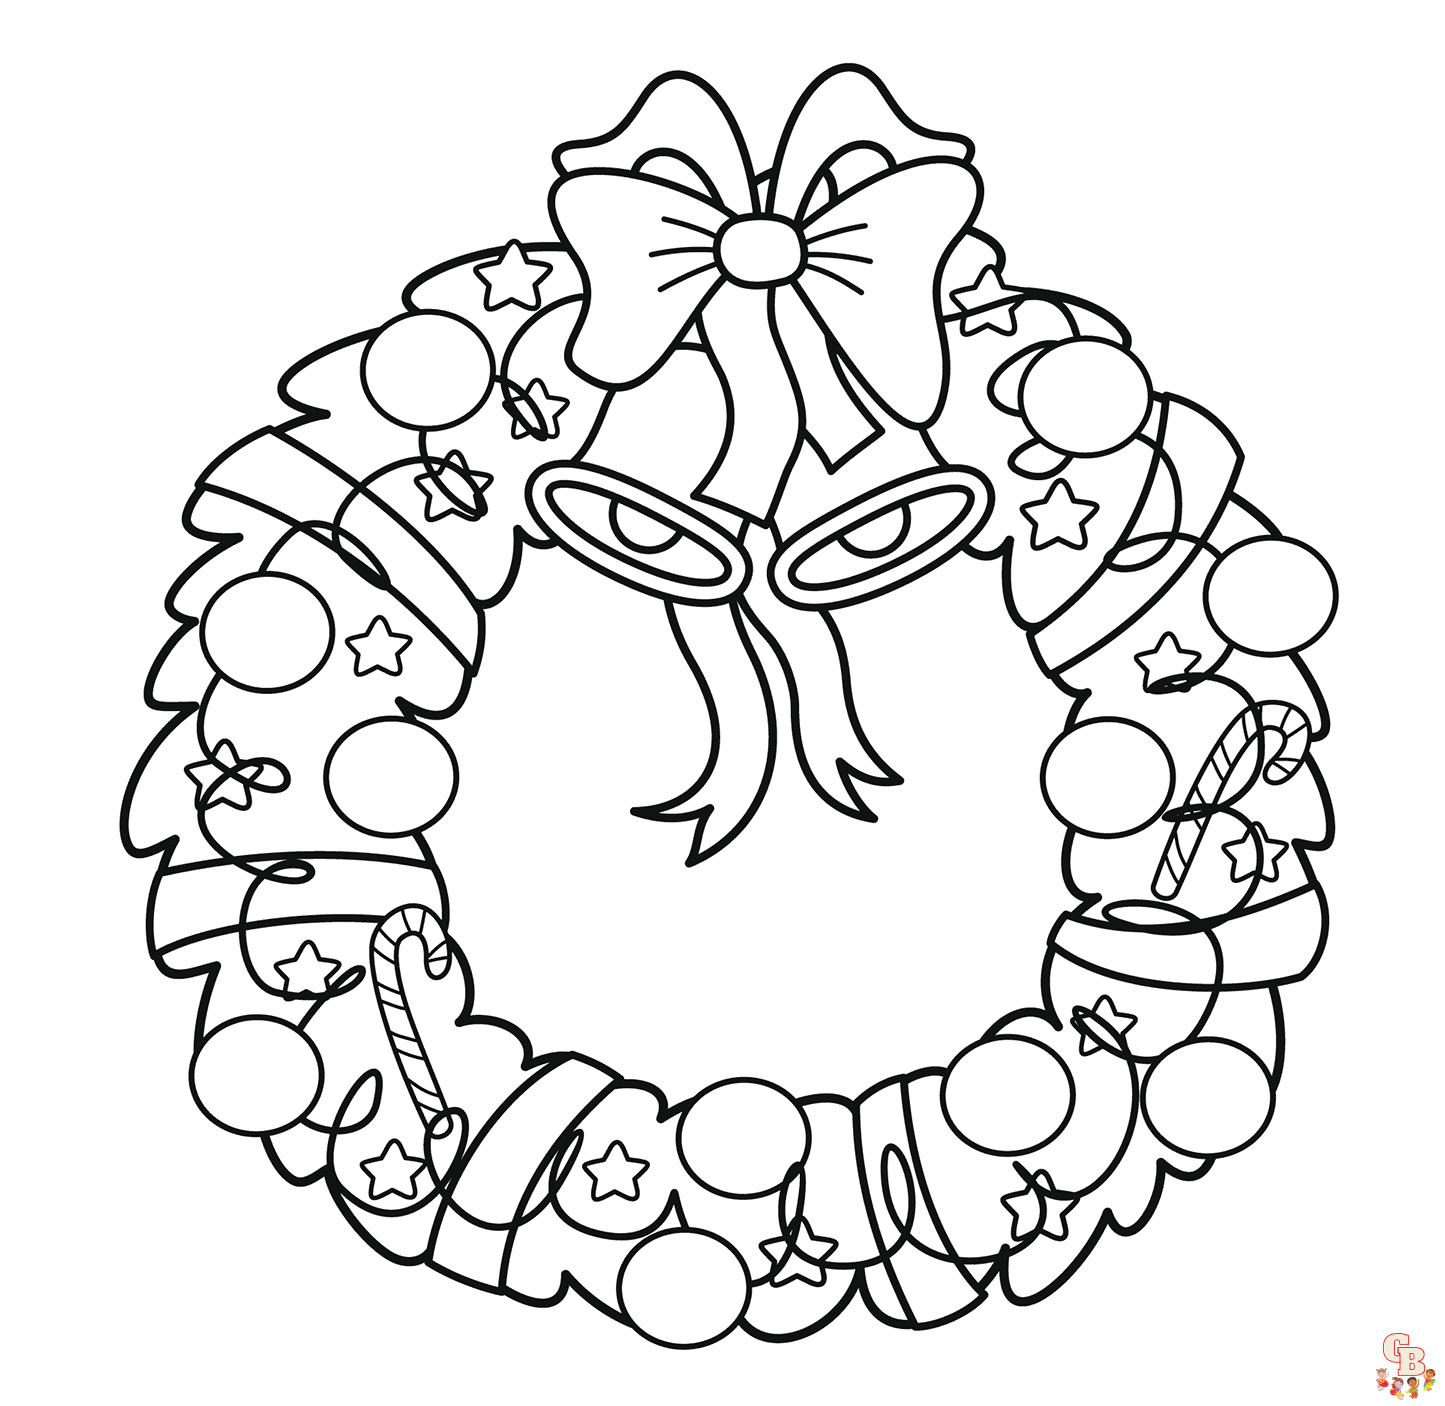 Printable wreath coloring pages free for kids and adults